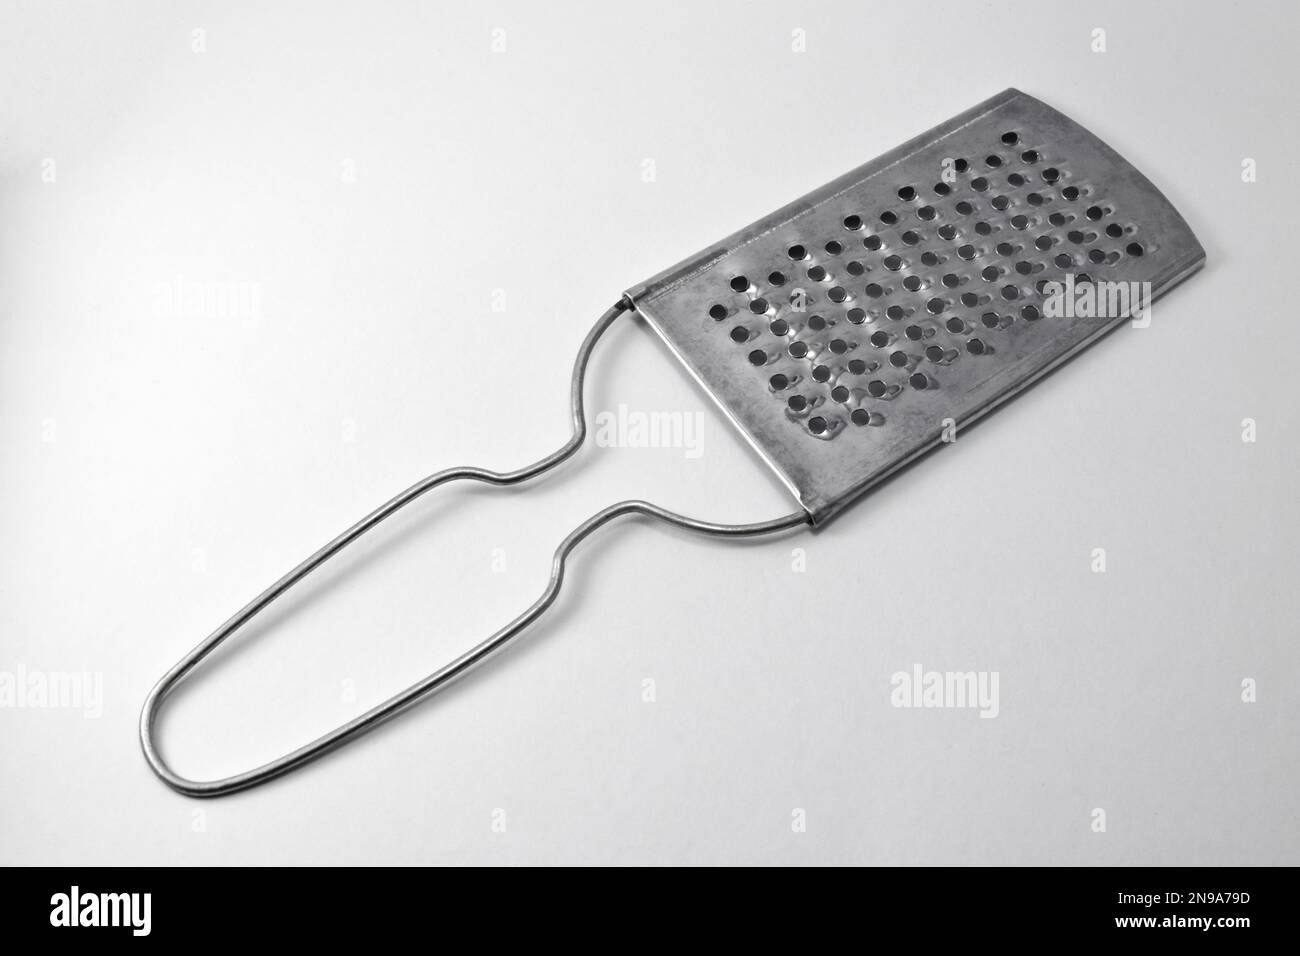 https://c8.alamy.com/comp/2N9A79D/stainless-steel-cheese-grater-isolated-on-white-background-2N9A79D.jpg